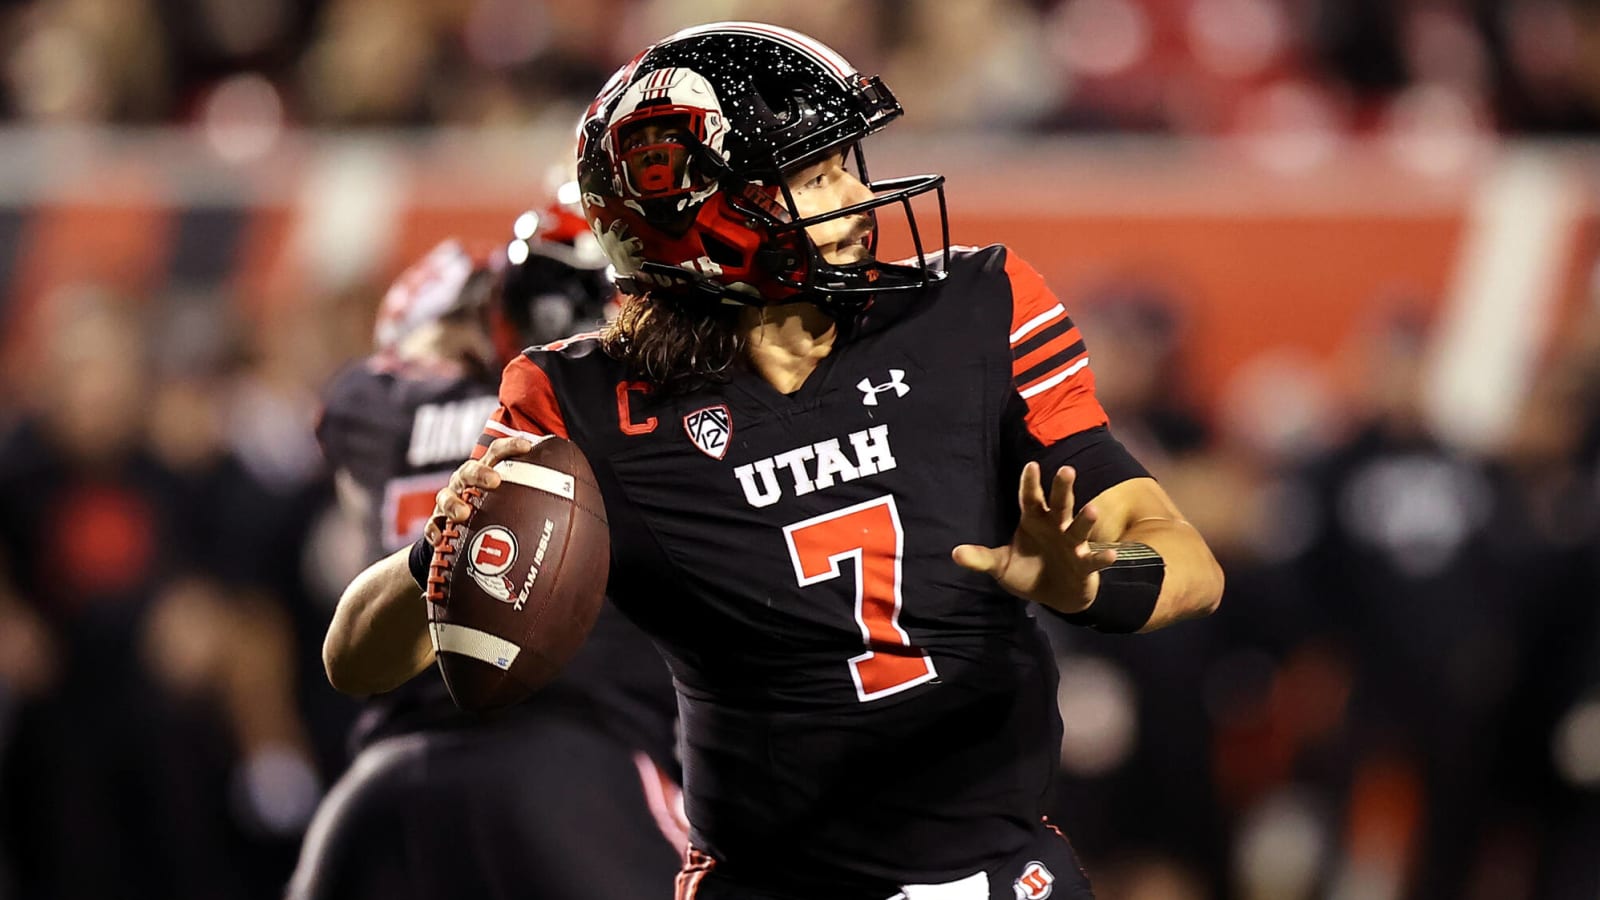 Watch: Utah scores late TD, completes two-point play for 43-42 win